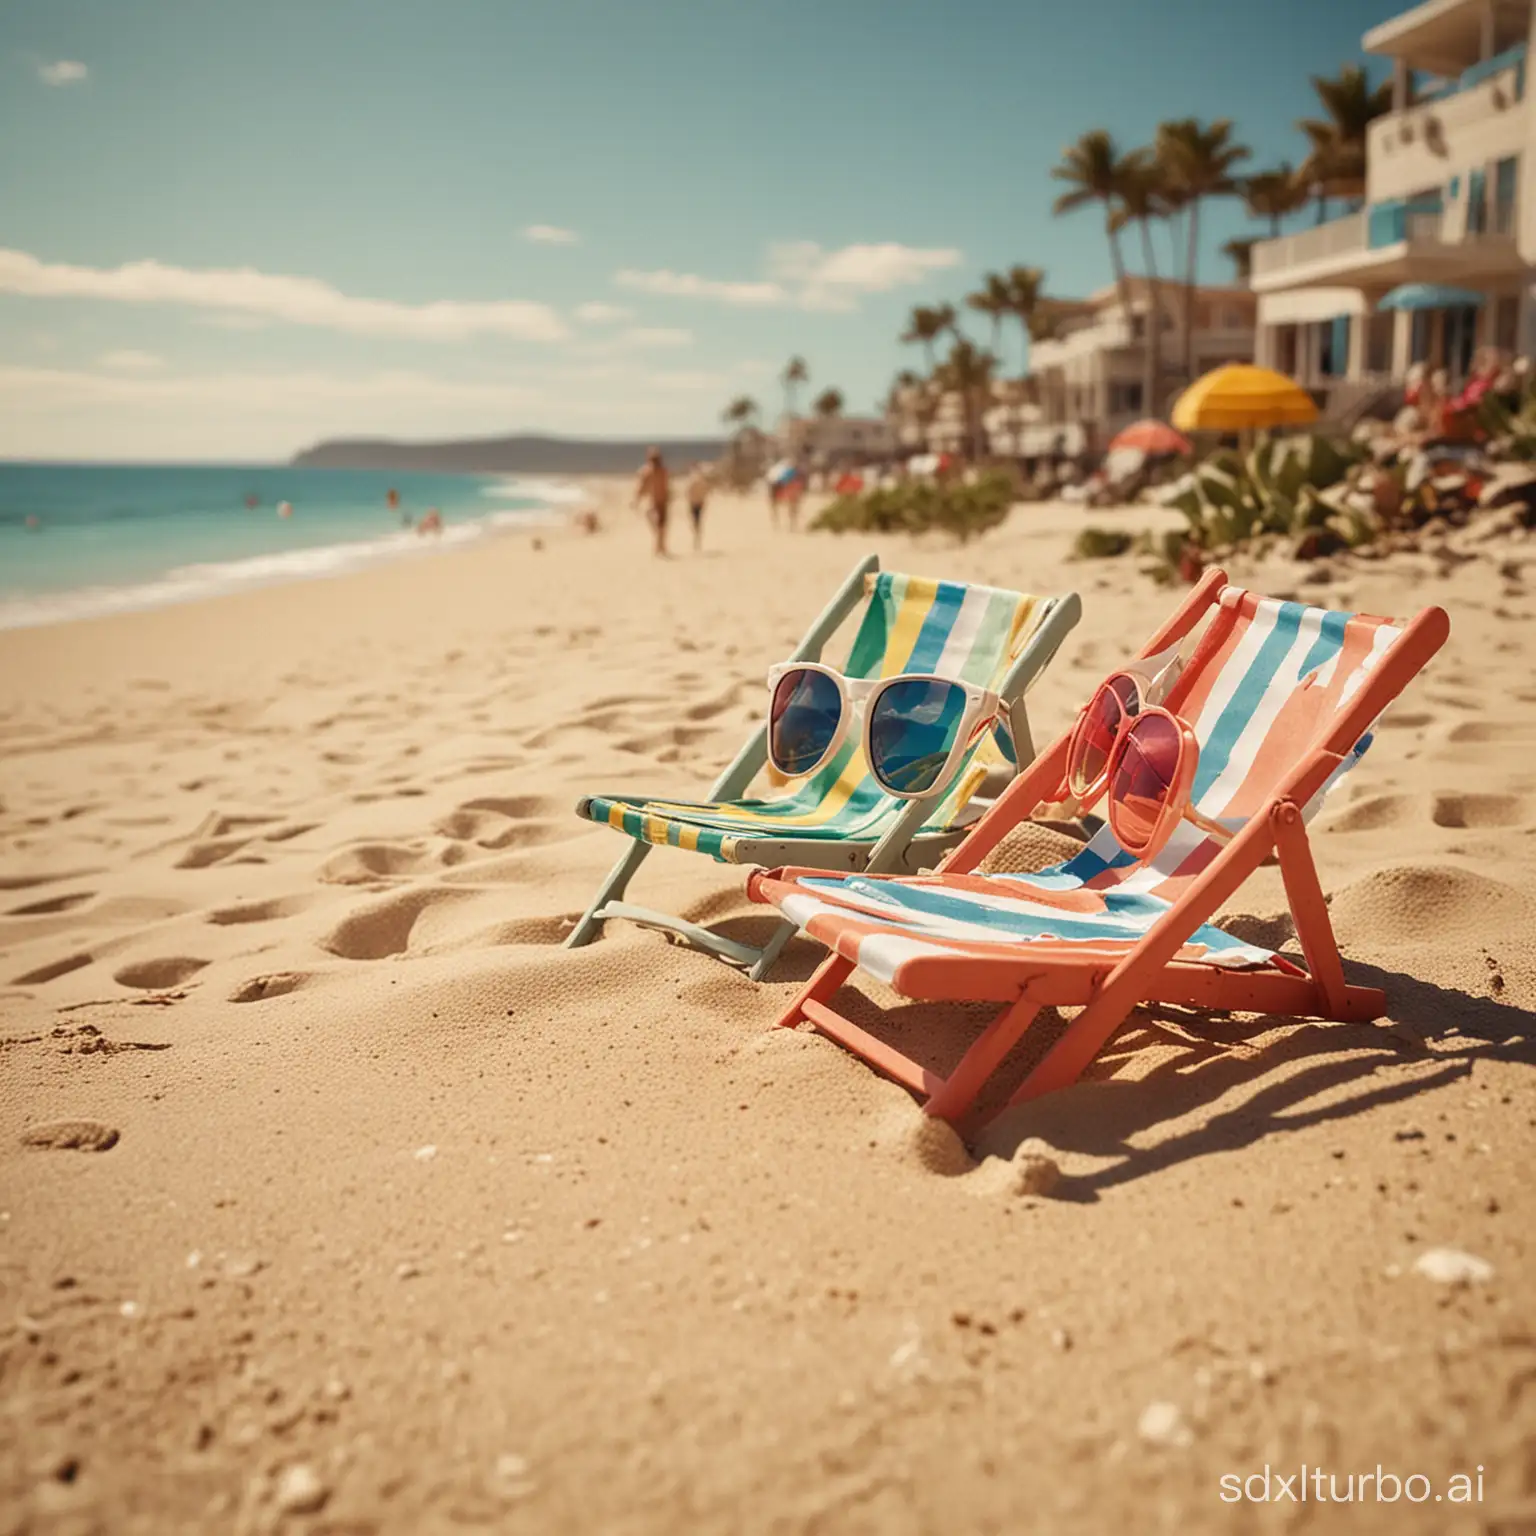 Miniature-Beach-Scene-with-Colored-Sunglasses-and-Resort-Ambiance